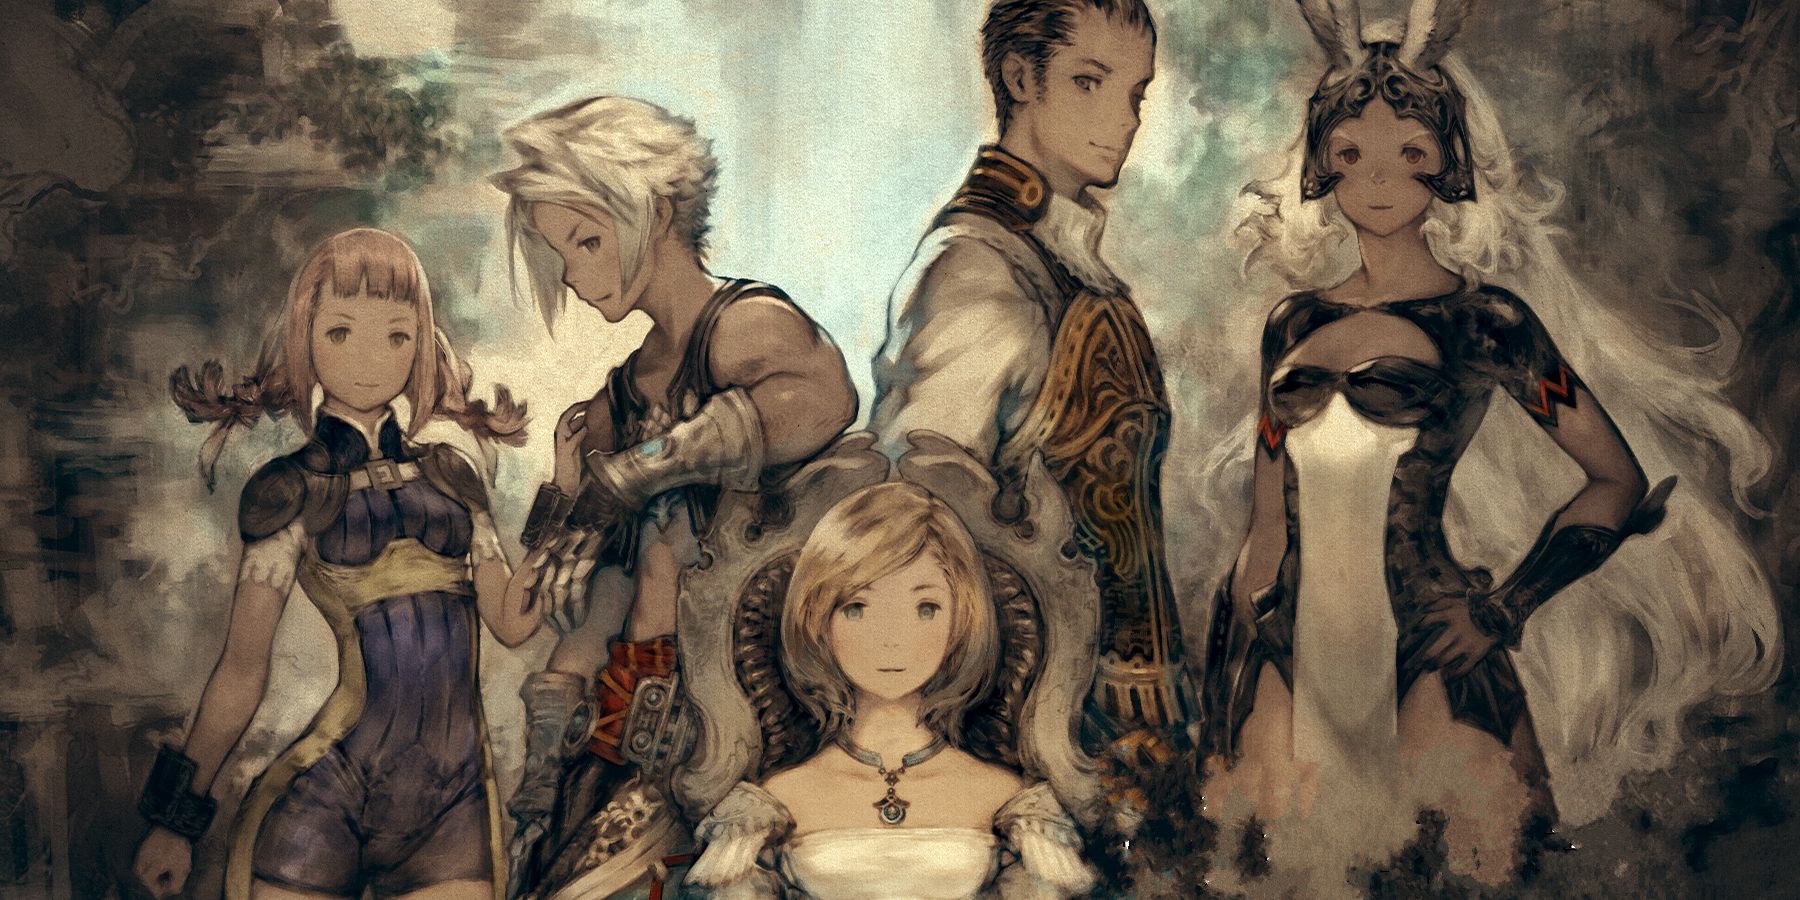 FF12 Ivalice characters